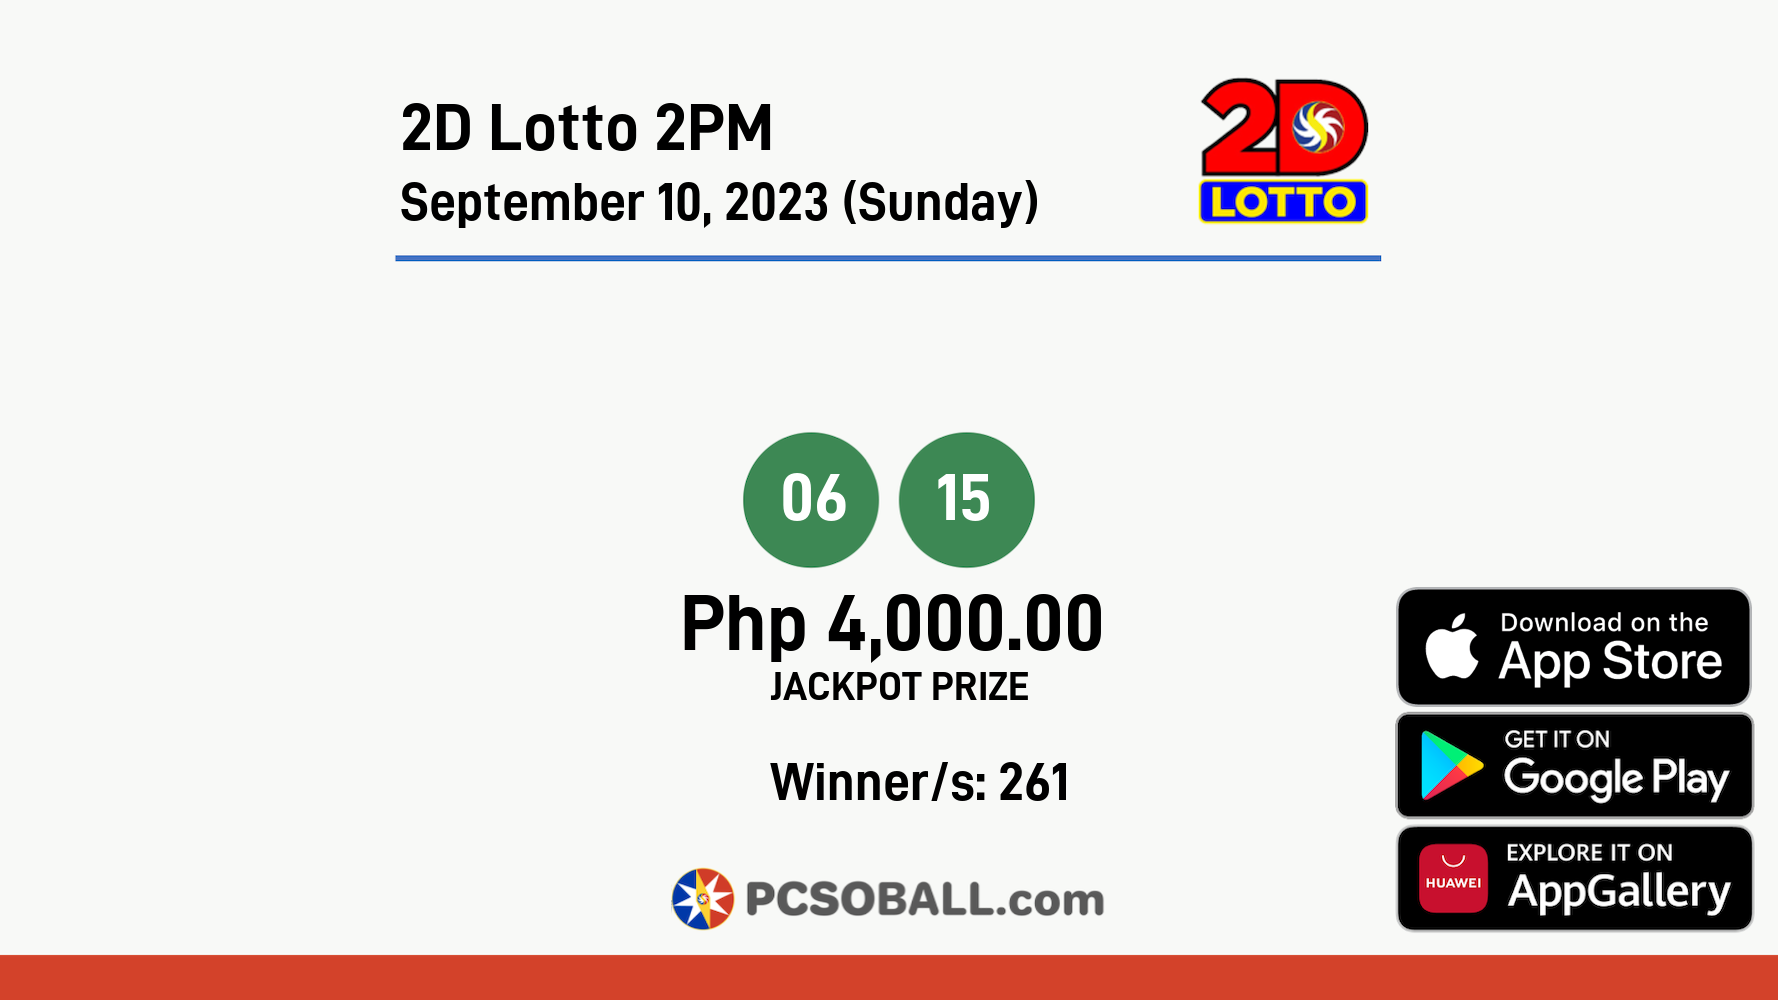 2D Lotto 2PM September 10, 2023 (Sunday) Result